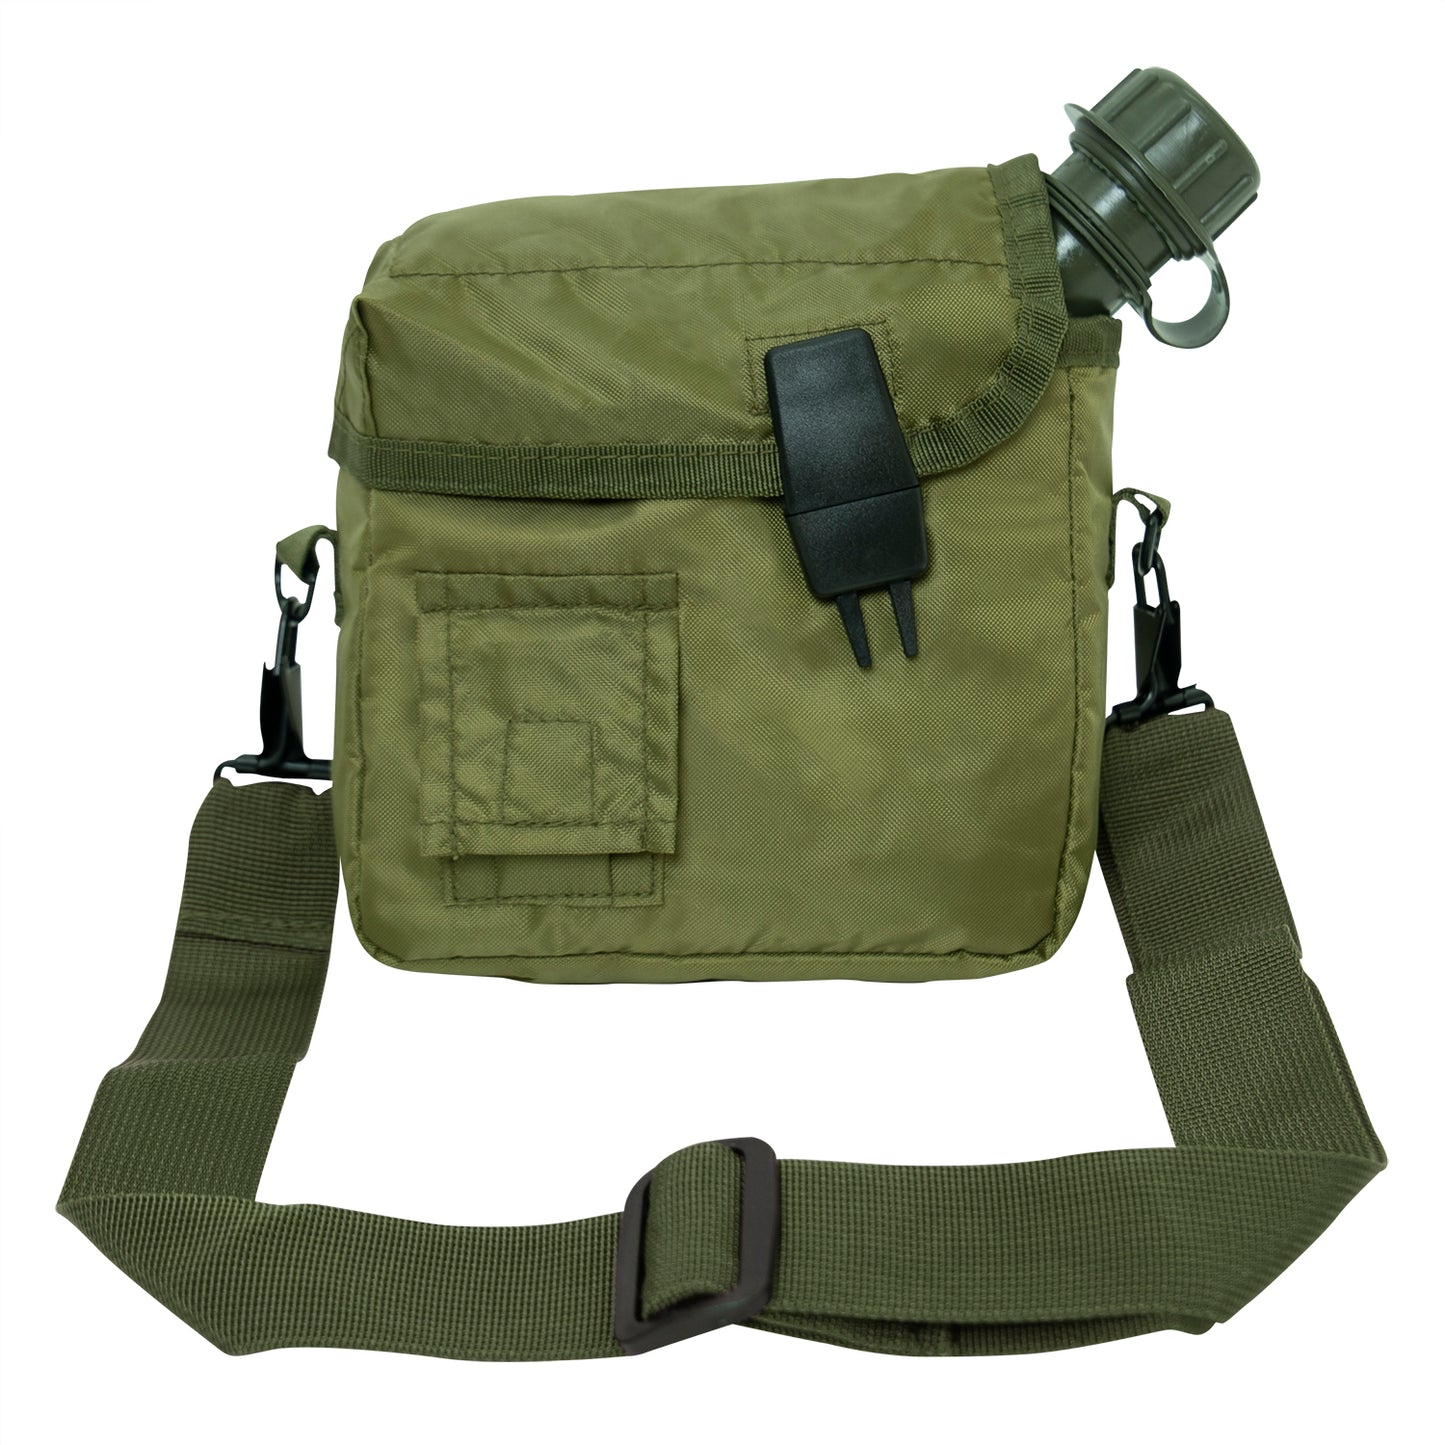 2 Quart Canteen Cover with Strap